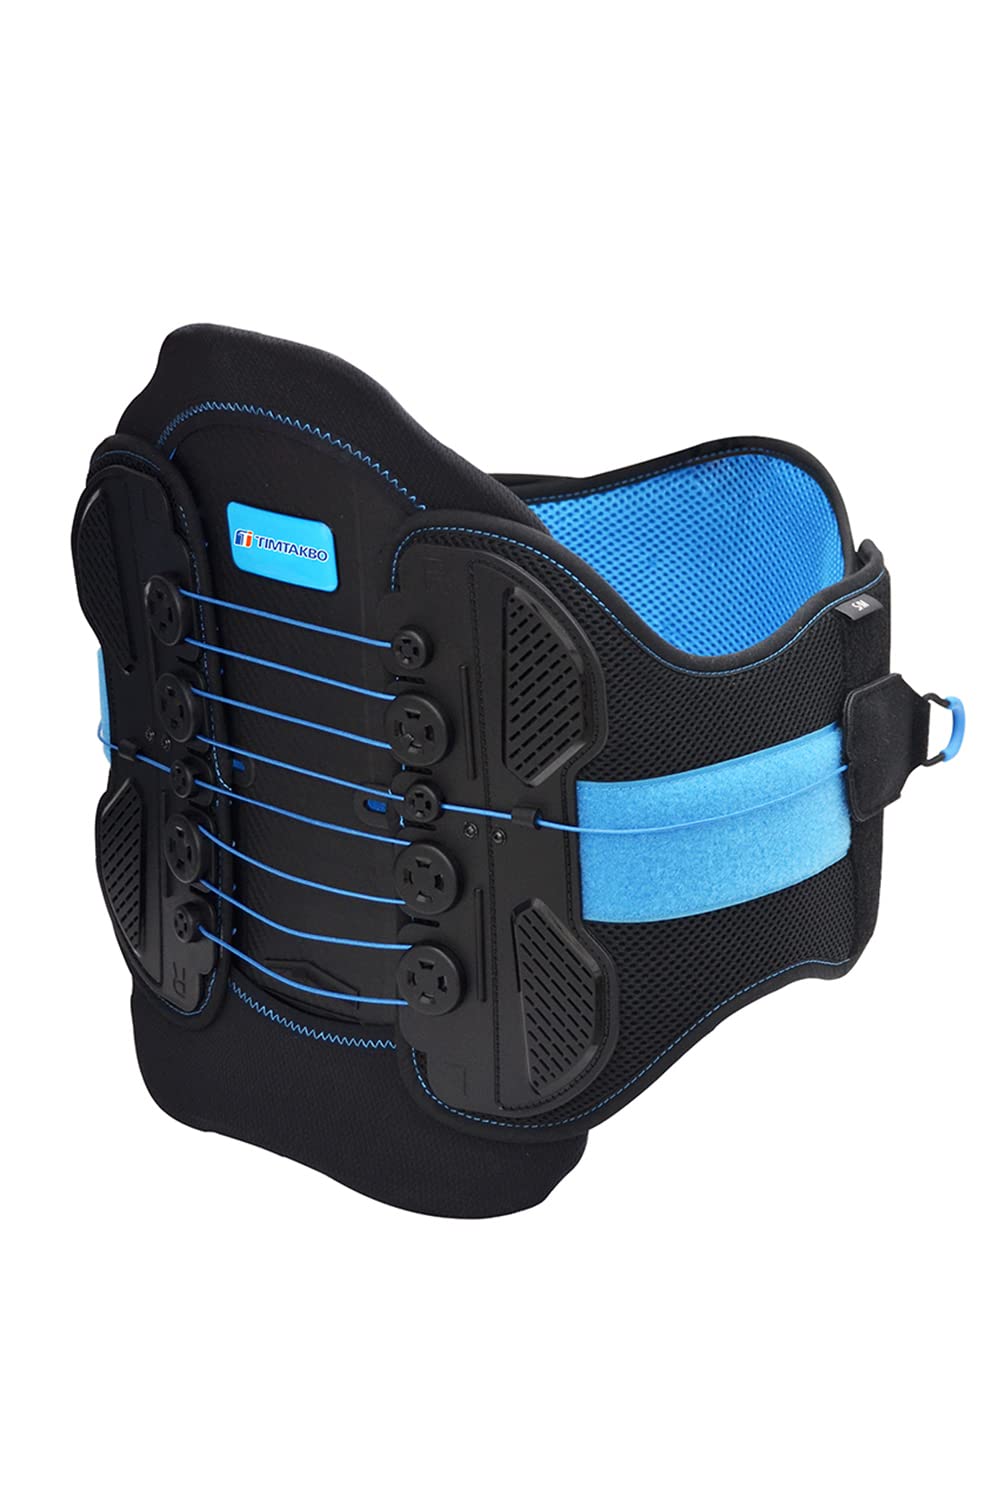 LSO Back Brace with Maximum Decompression Plate & Adjustable Arch Back Support,Pulley System Lumbar Support Belt for Herniated Disc Pain Relief,Spine Stenosis,Sciatica,Scoliosis (Blue, L/XL) - Hatke